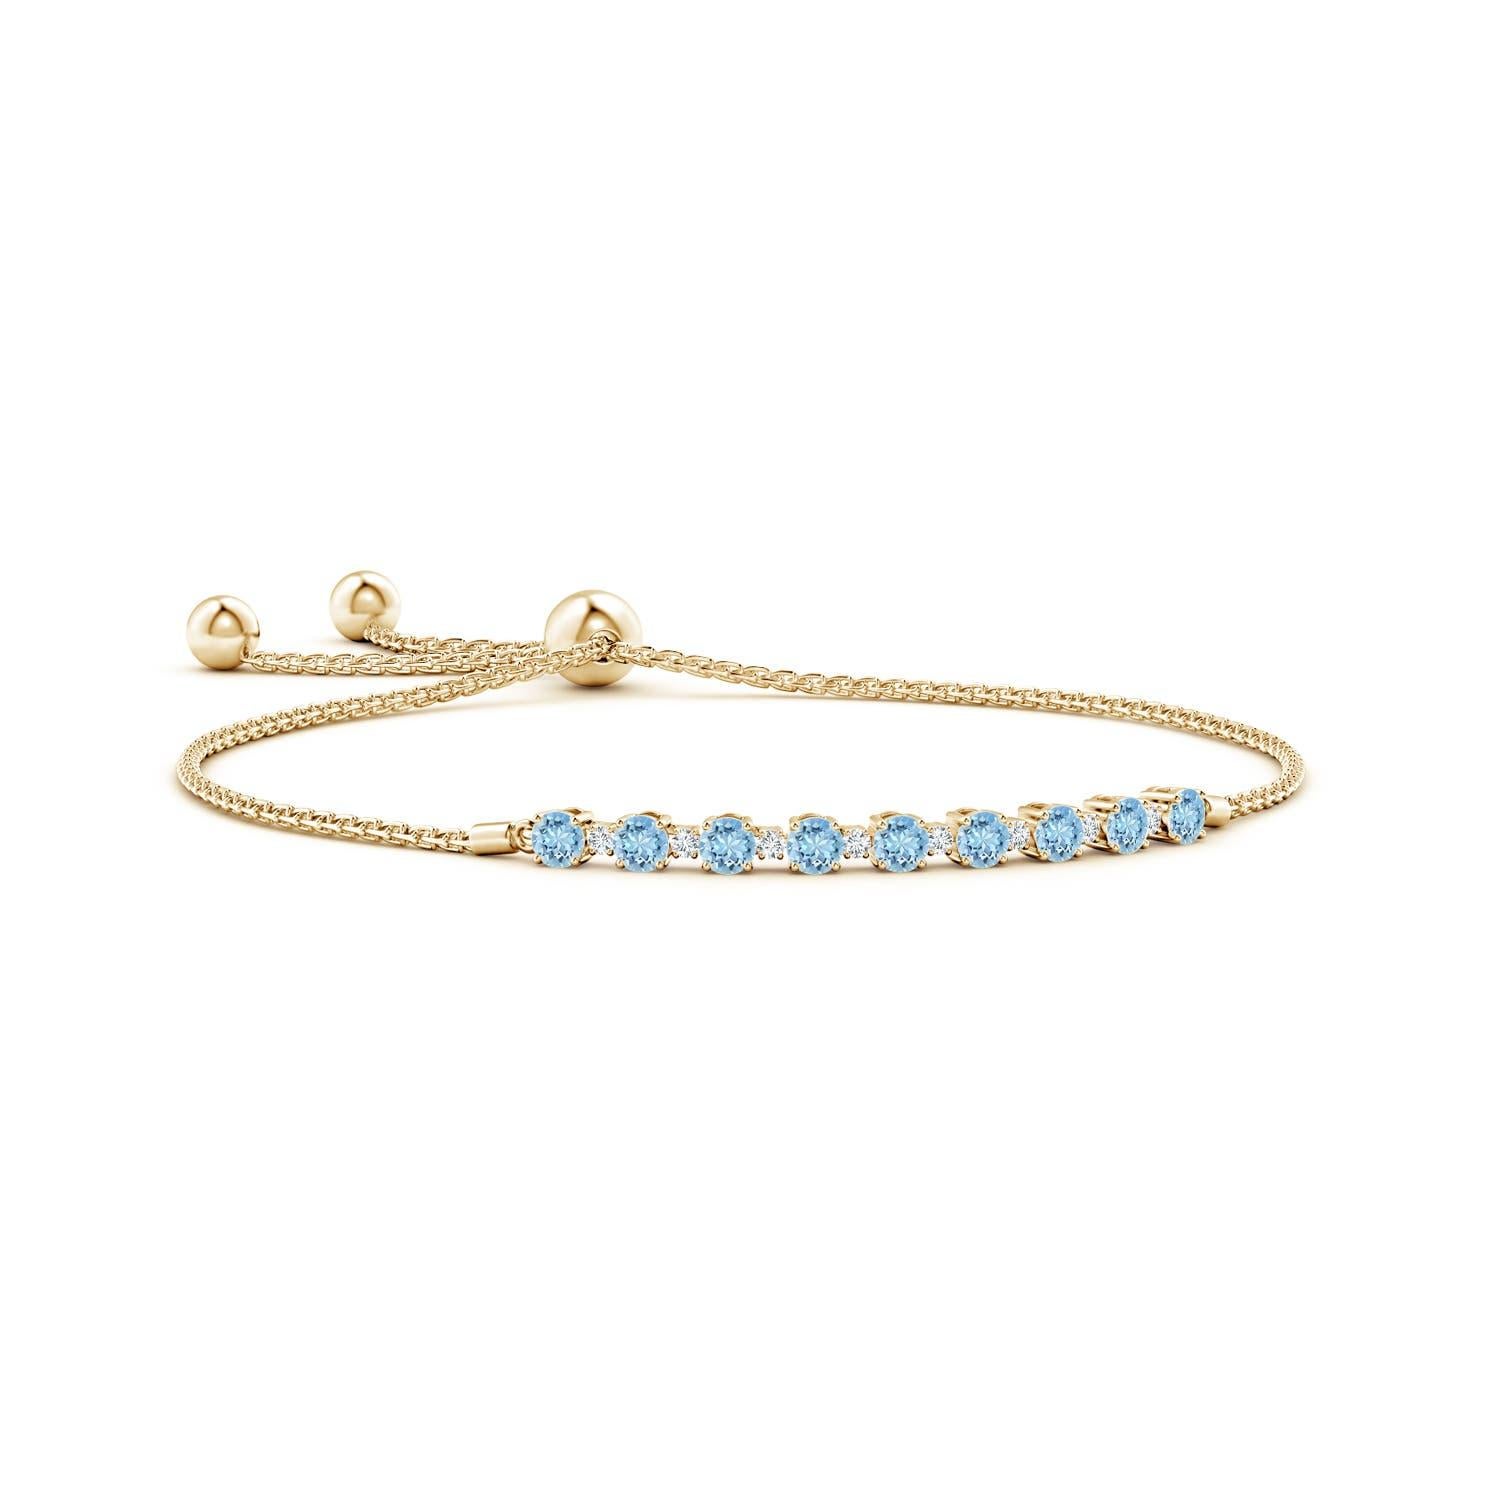 Sea blue aquamarines and glittering diamonds come together on this 14k yellow gold tennis bolo bracelet. They are prong set alternately and create a classic look. This bracelet is adjustable to fit most wrists.